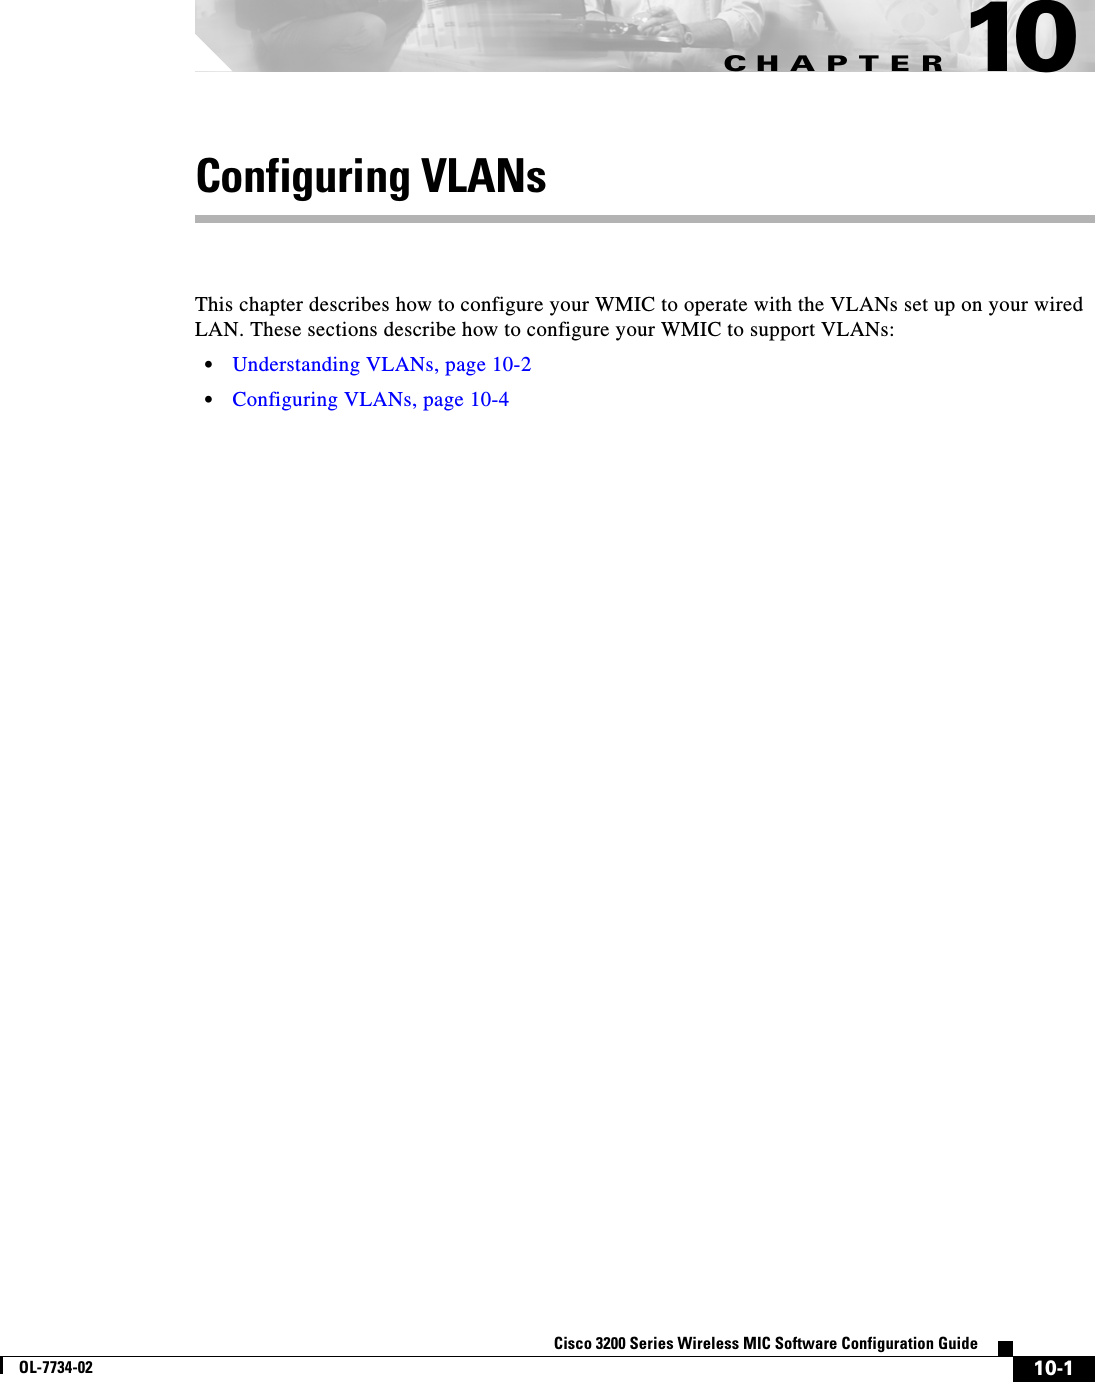 CHAPTER10-1Cisco 3200 Series Wireless MIC Software Configuration GuideOL-7734-0210Configuring VLANsThis chapter describes how to configure your WMIC to operate with the VLANs set up on your wired LAN. These sections describe how to configure your WMIC to support VLANs:•Understanding VLANs, page 10-2•Configuring VLANs, page 10-4